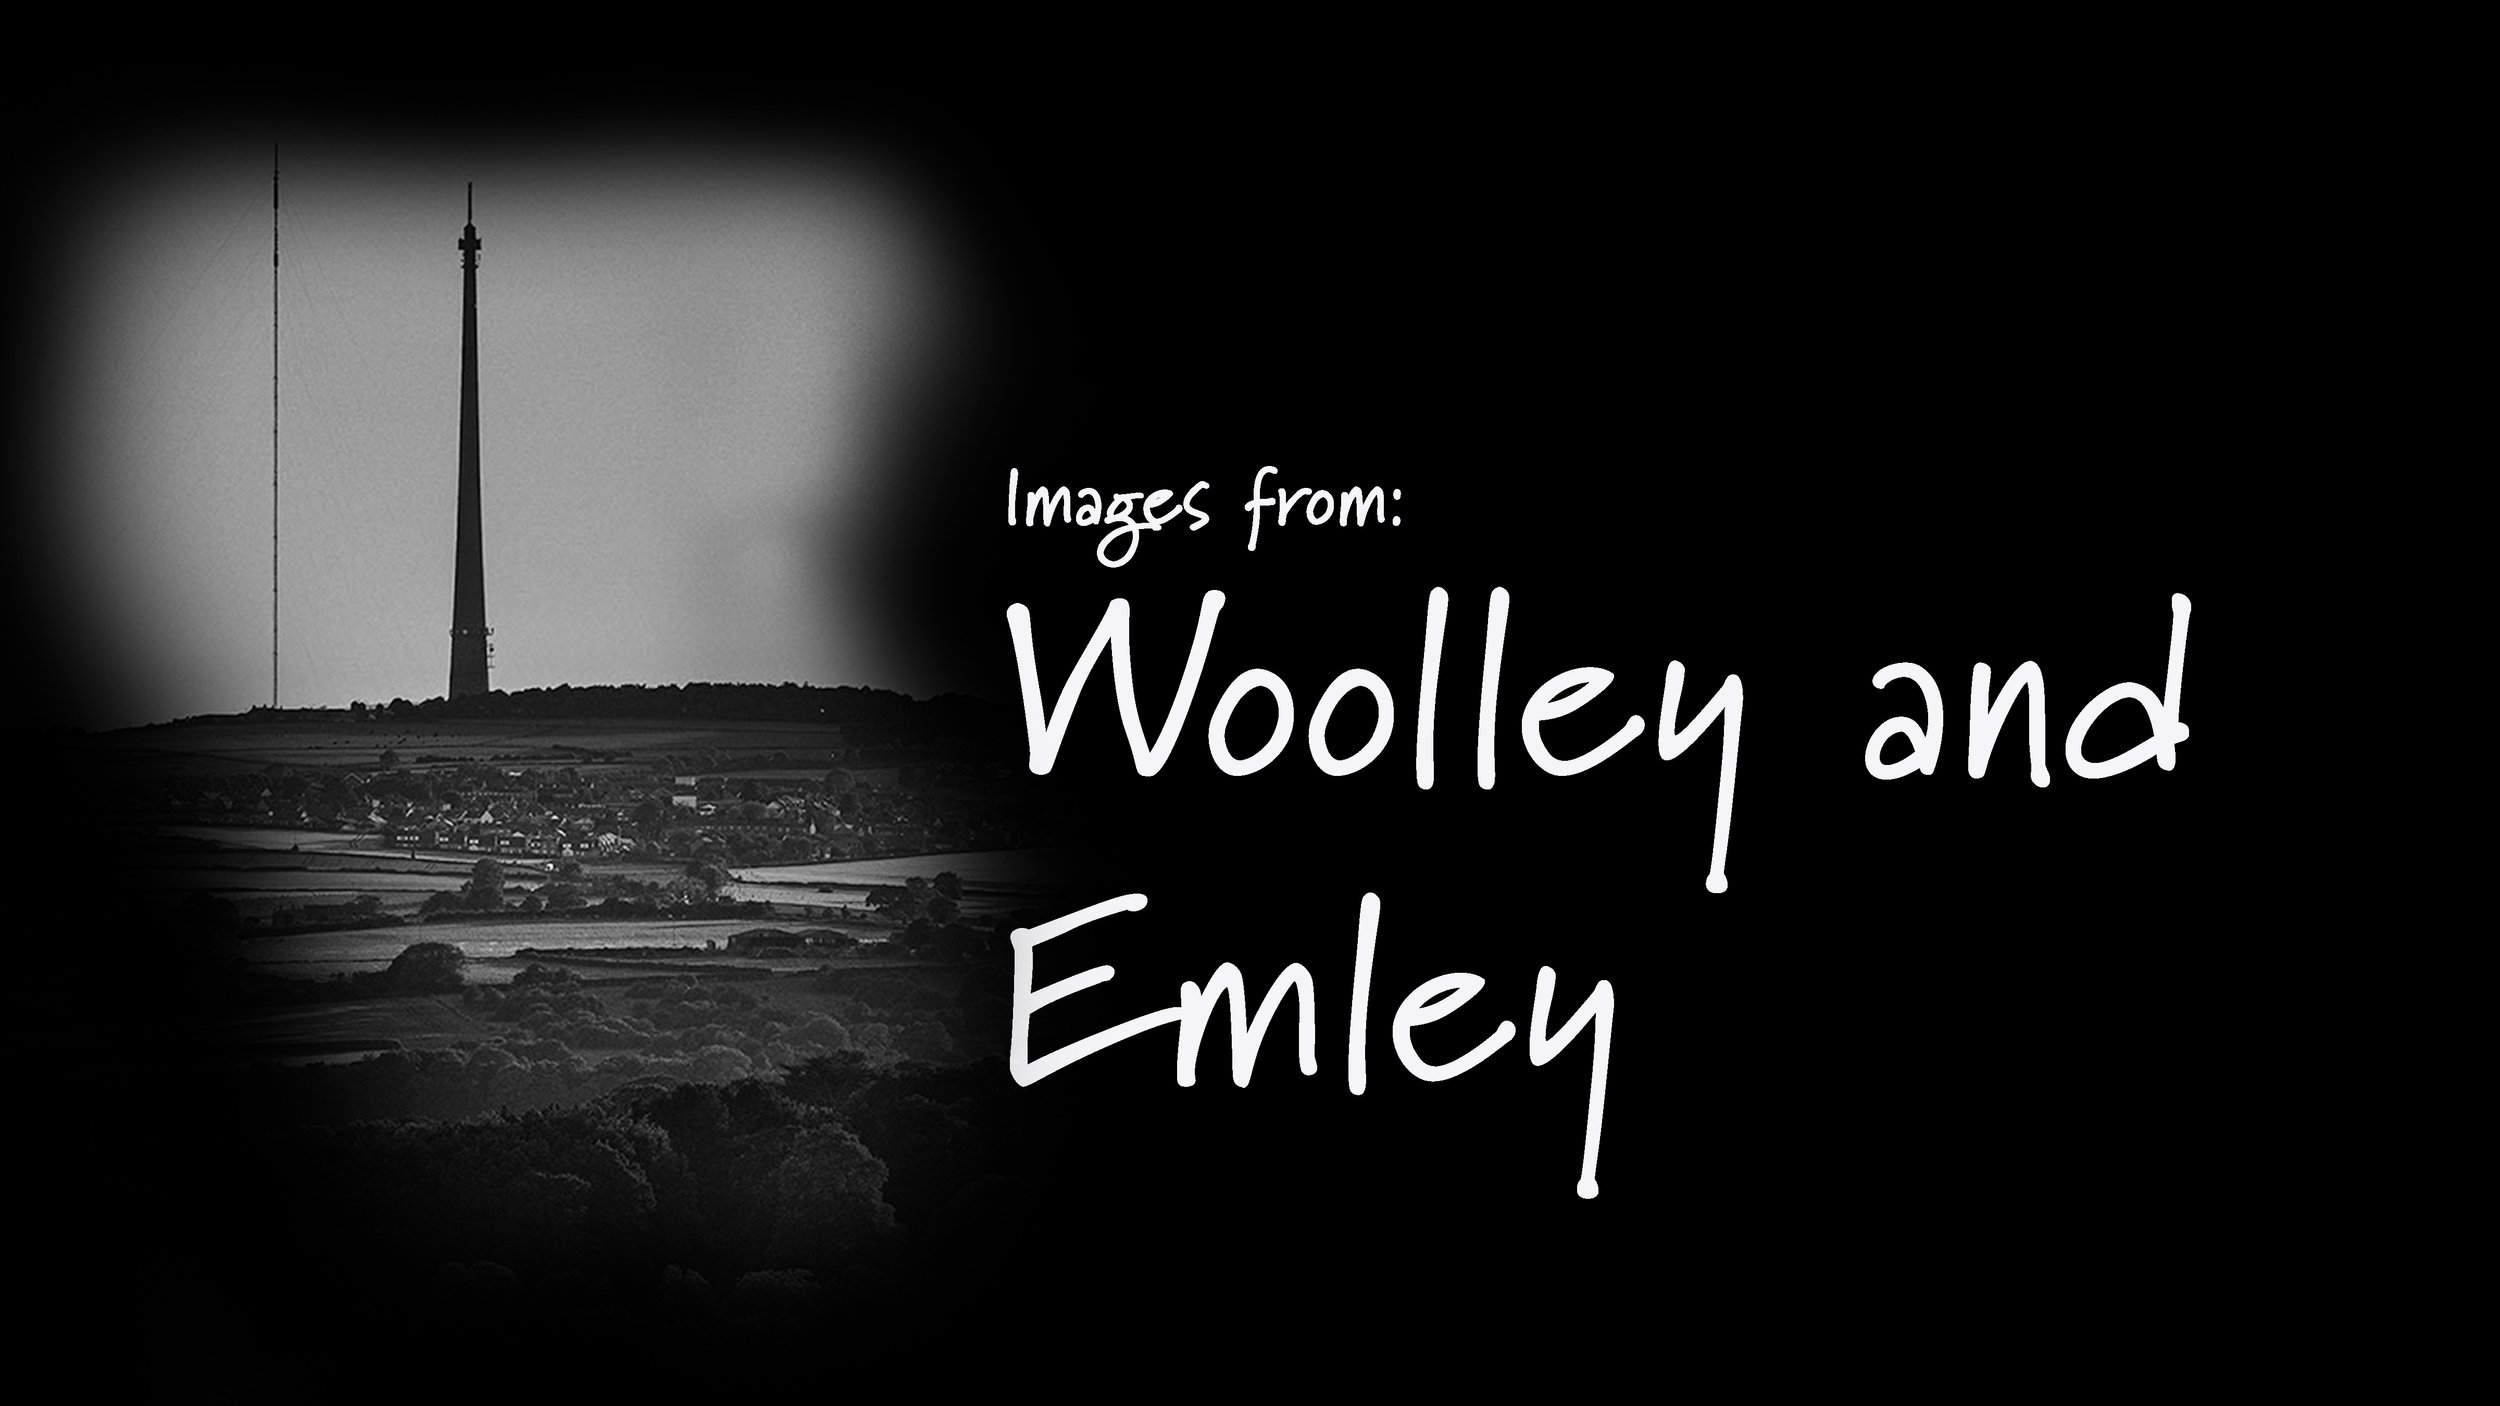 Woolley and Emley.jpg